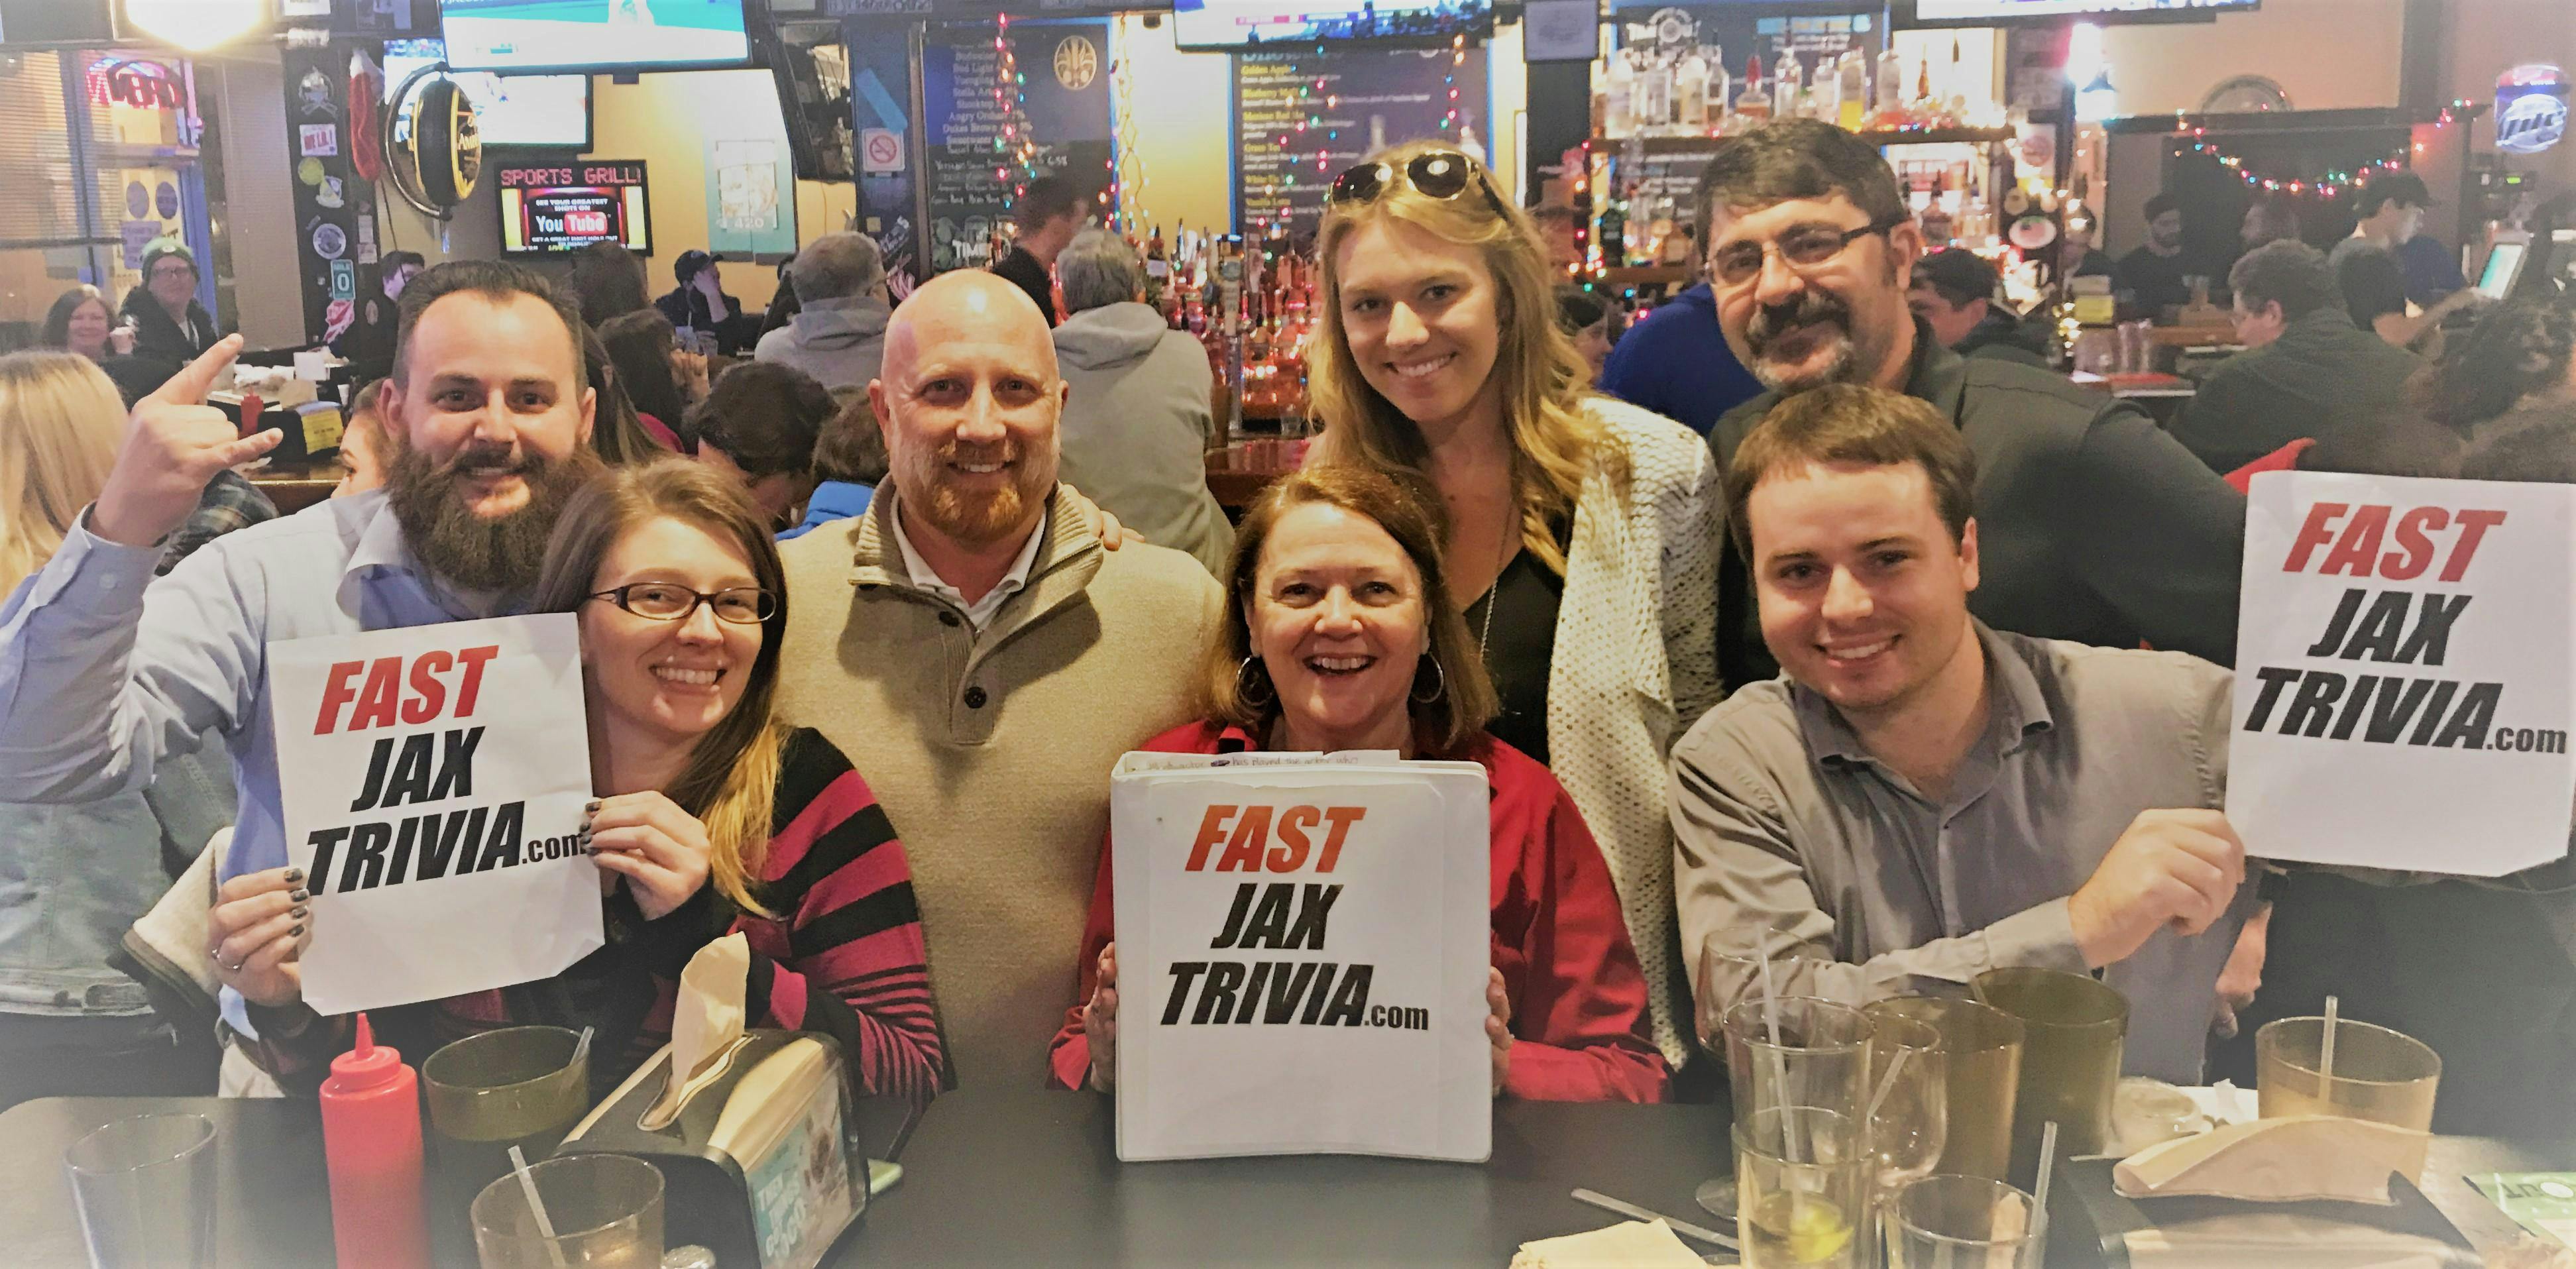 Wednesday Nights: Win Some of the BIGGEST Trivia Prizes In Jacksonville!